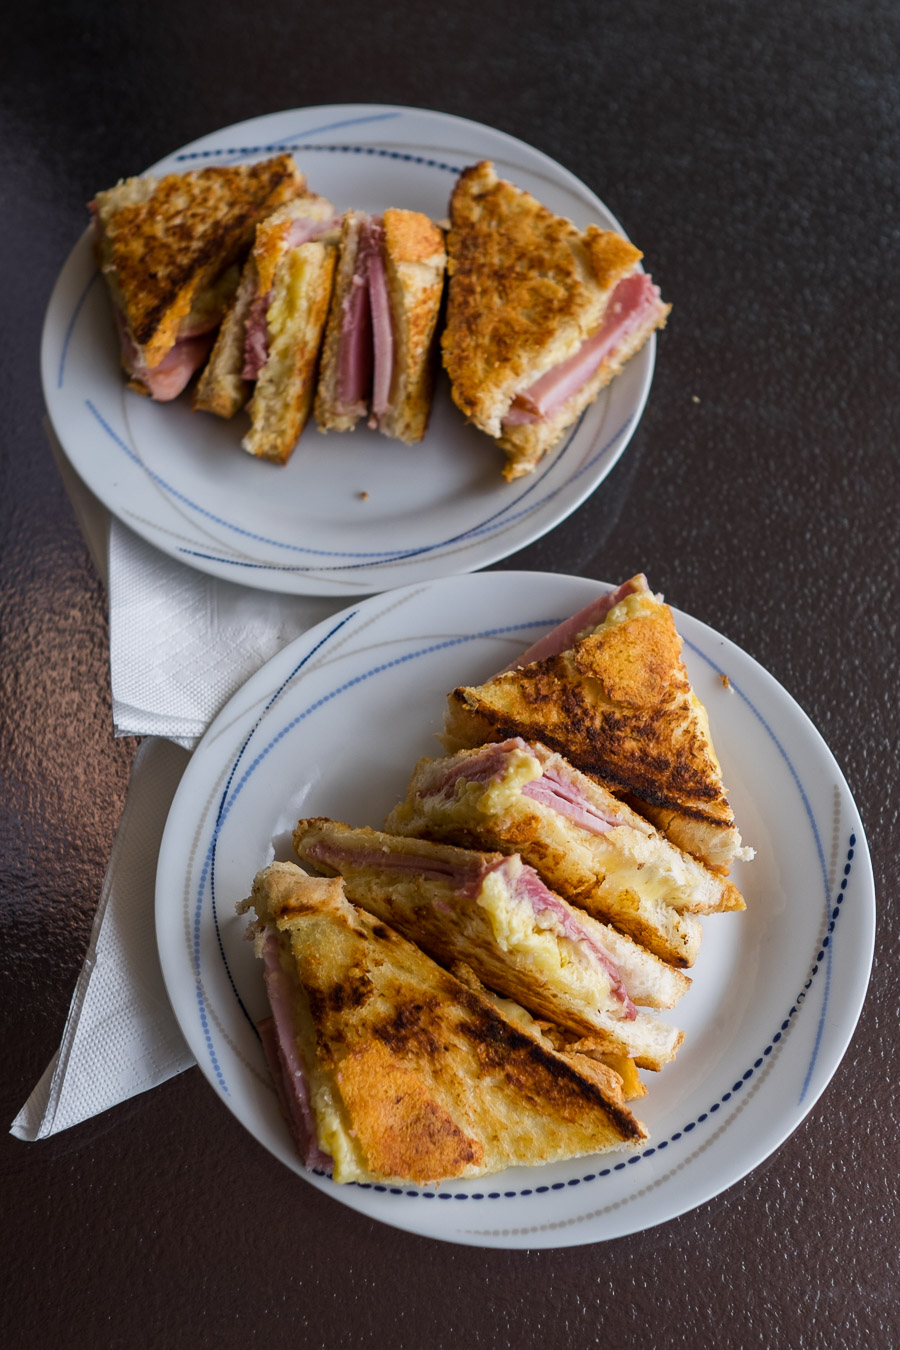 Ham, cheese and mustard toasted sandwiches